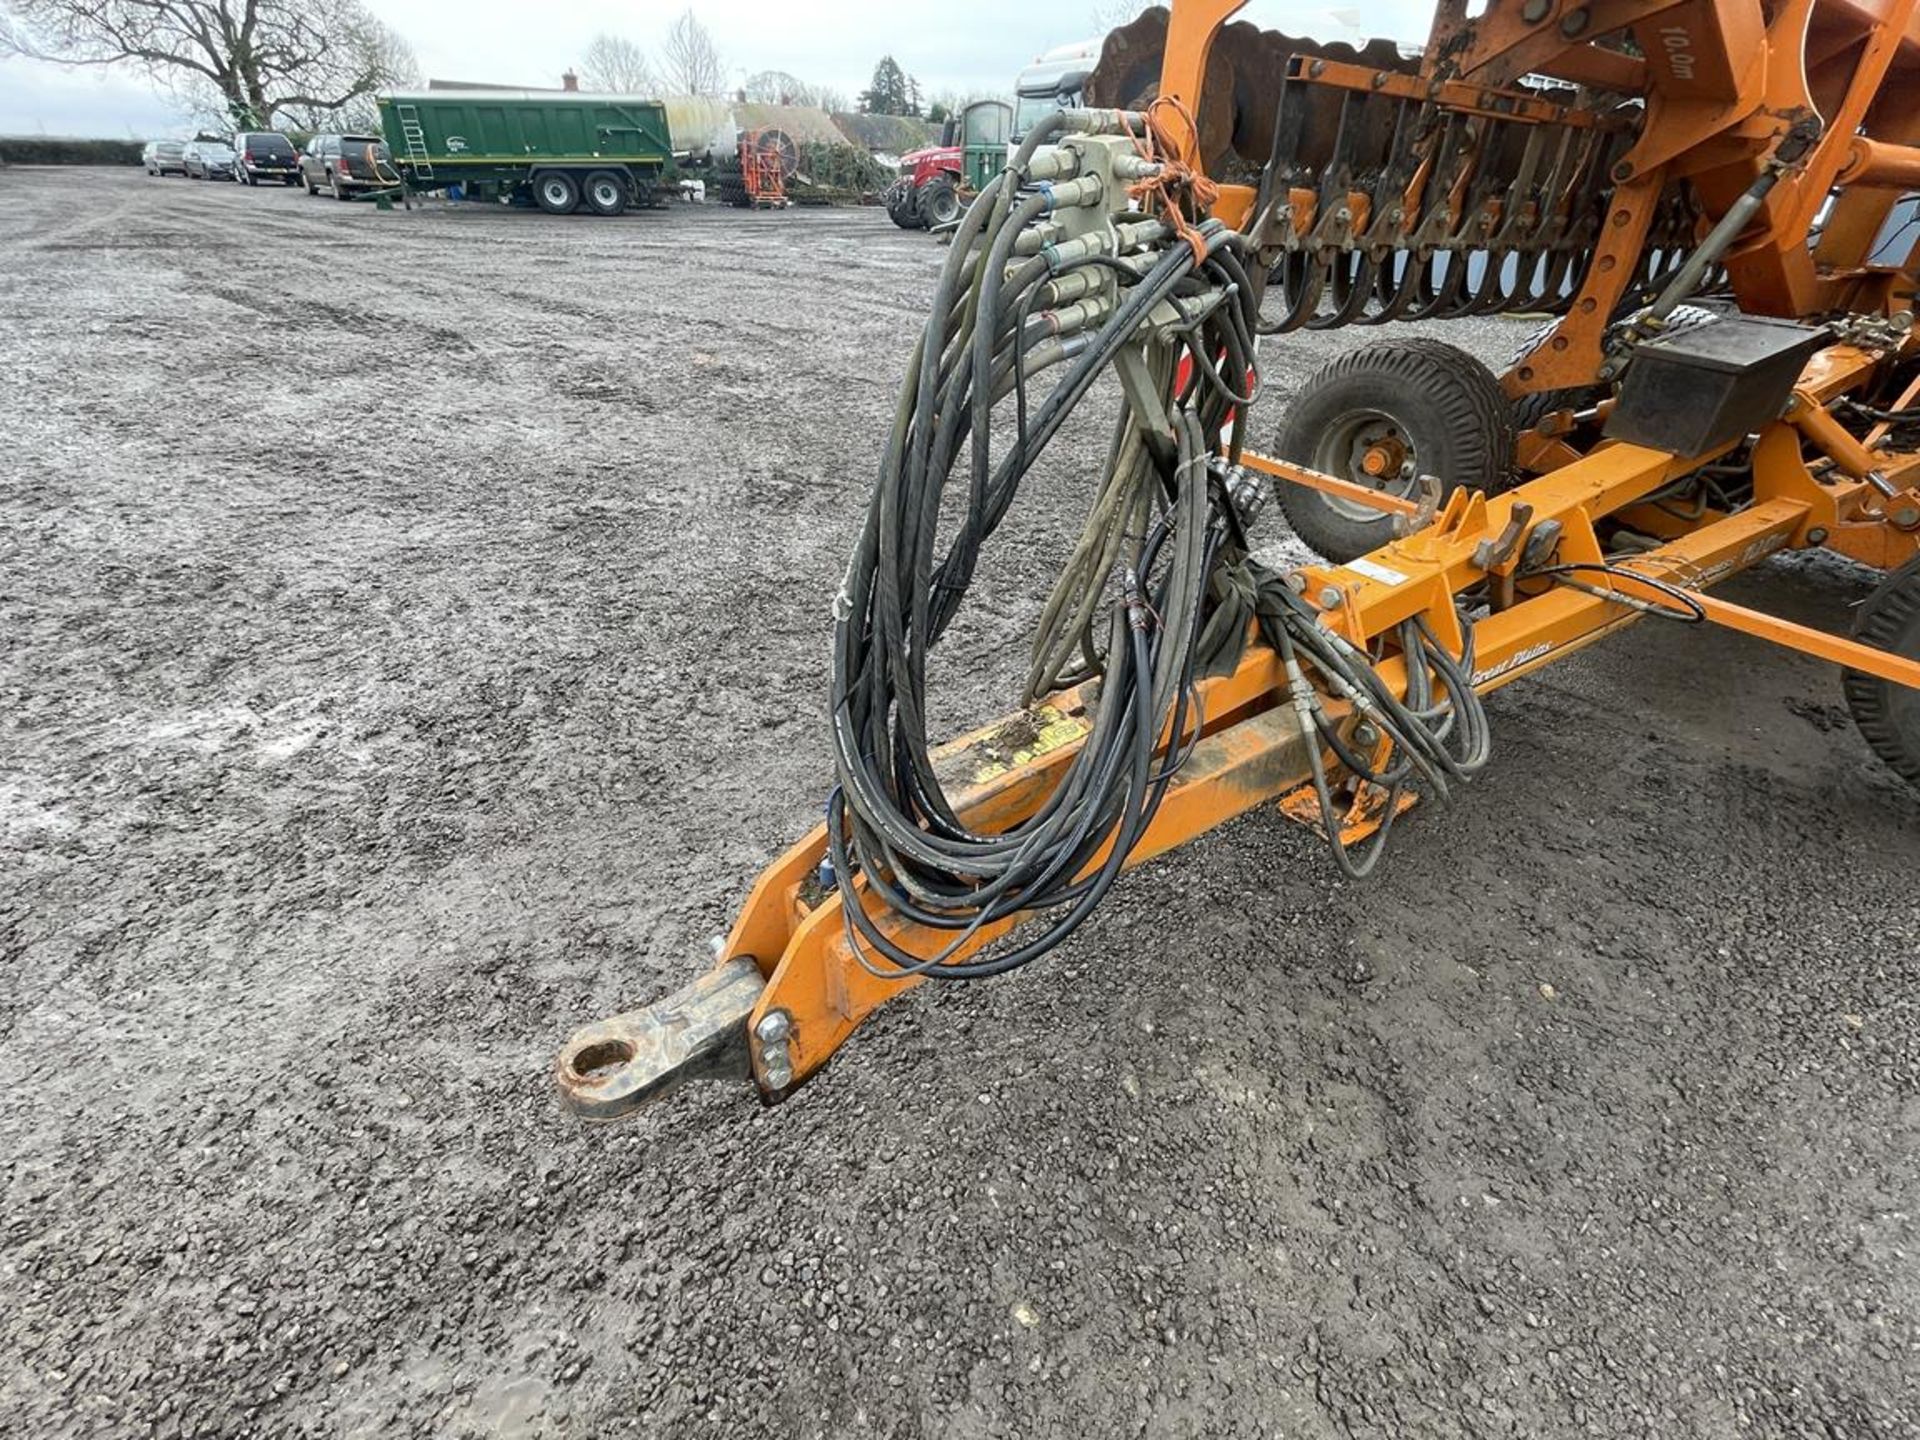 2010 Great Plains Simba X-Press 10.0M Disc Trailed Cultivator, S/No. 18011265, with Transport and - Image 7 of 8